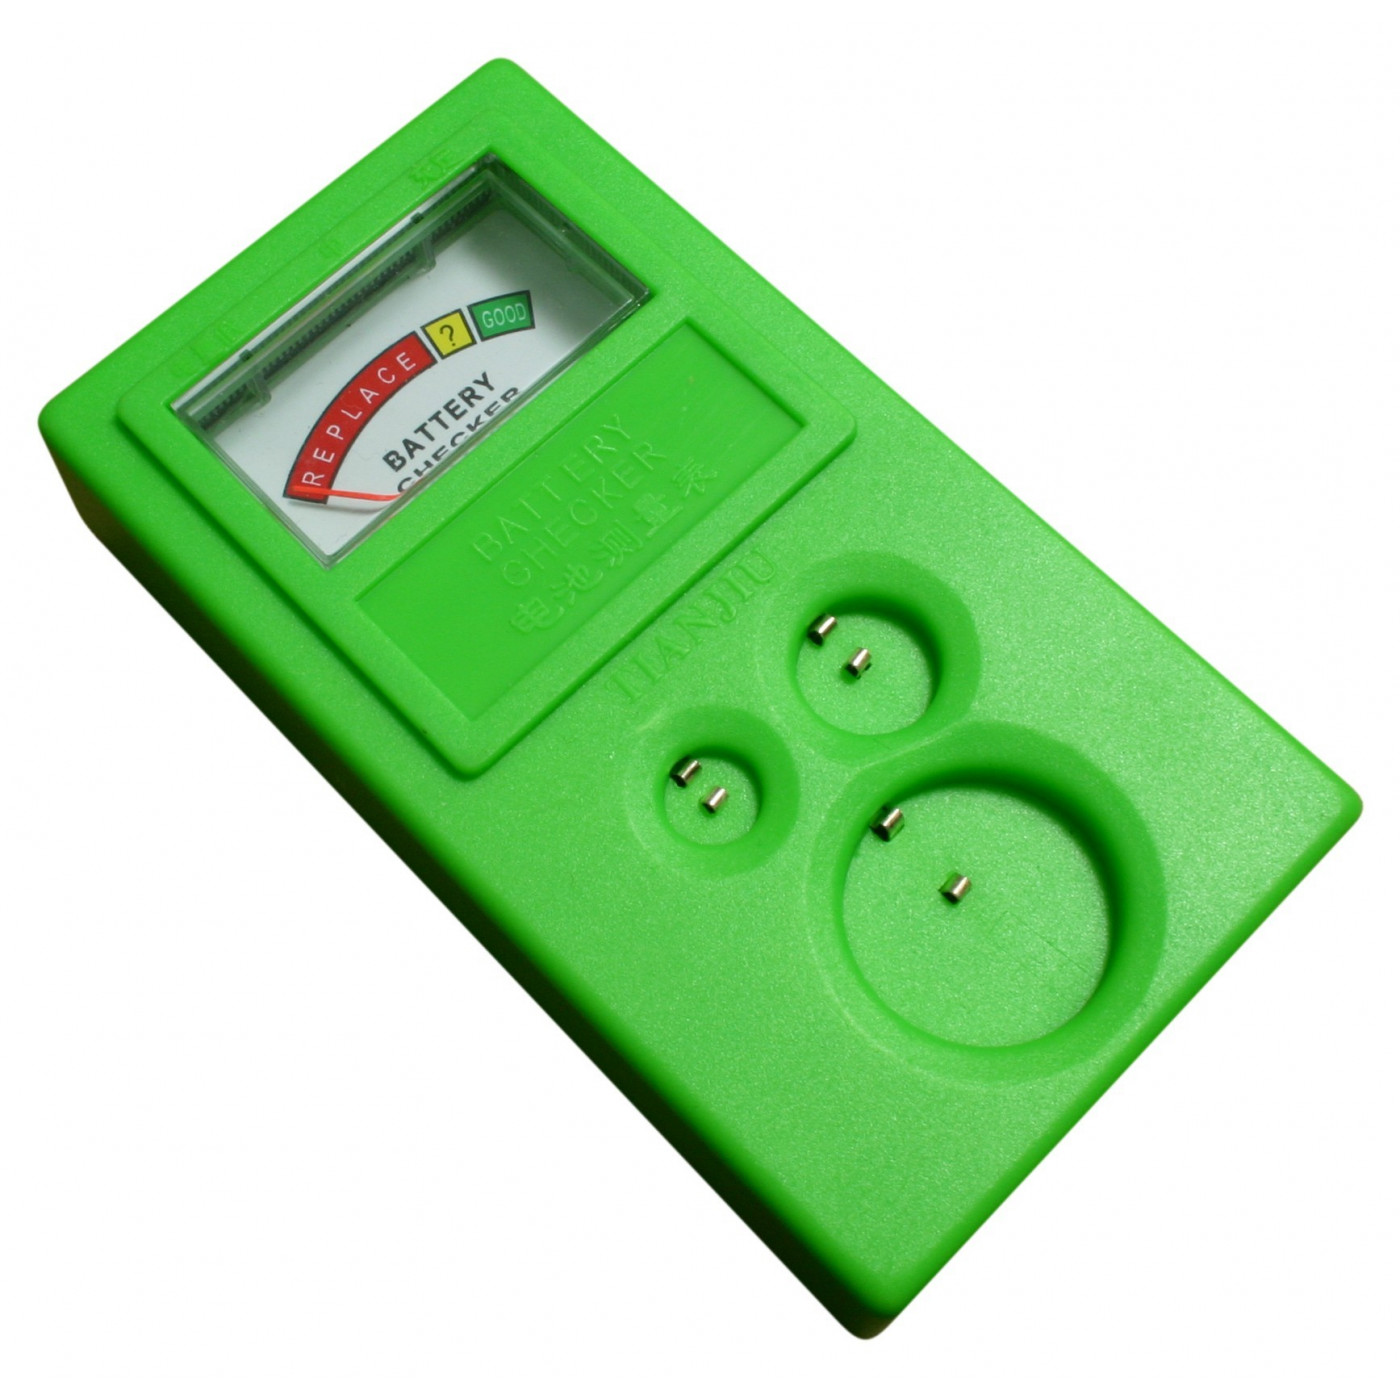 Battery tester for coin cell batteries